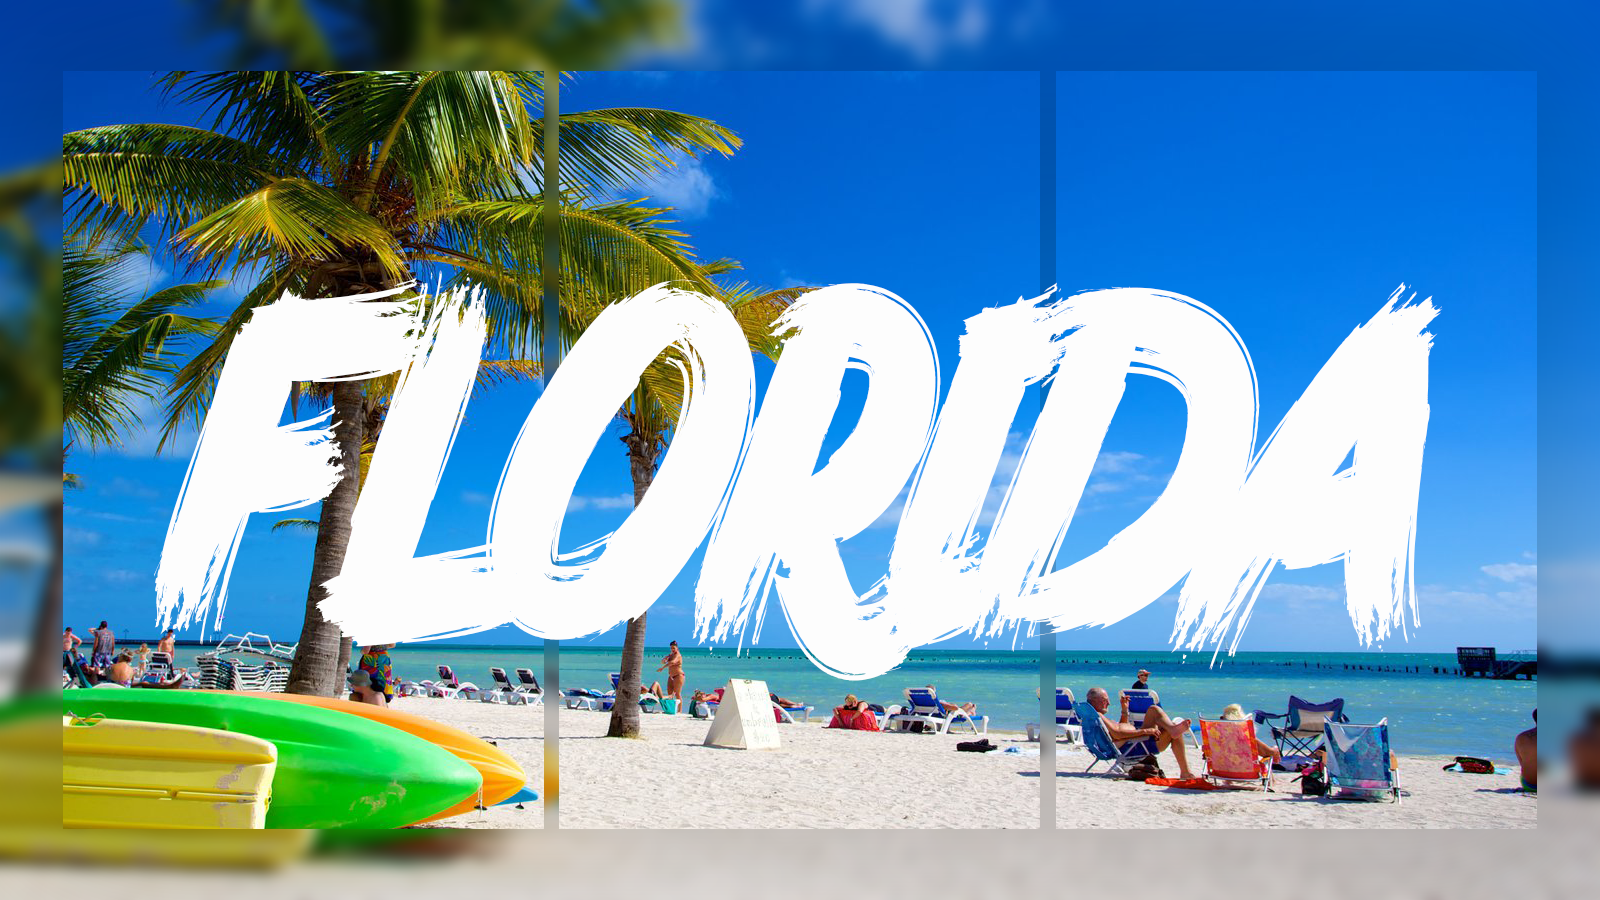 Florida wallpapers HD | Download Free backgrounds